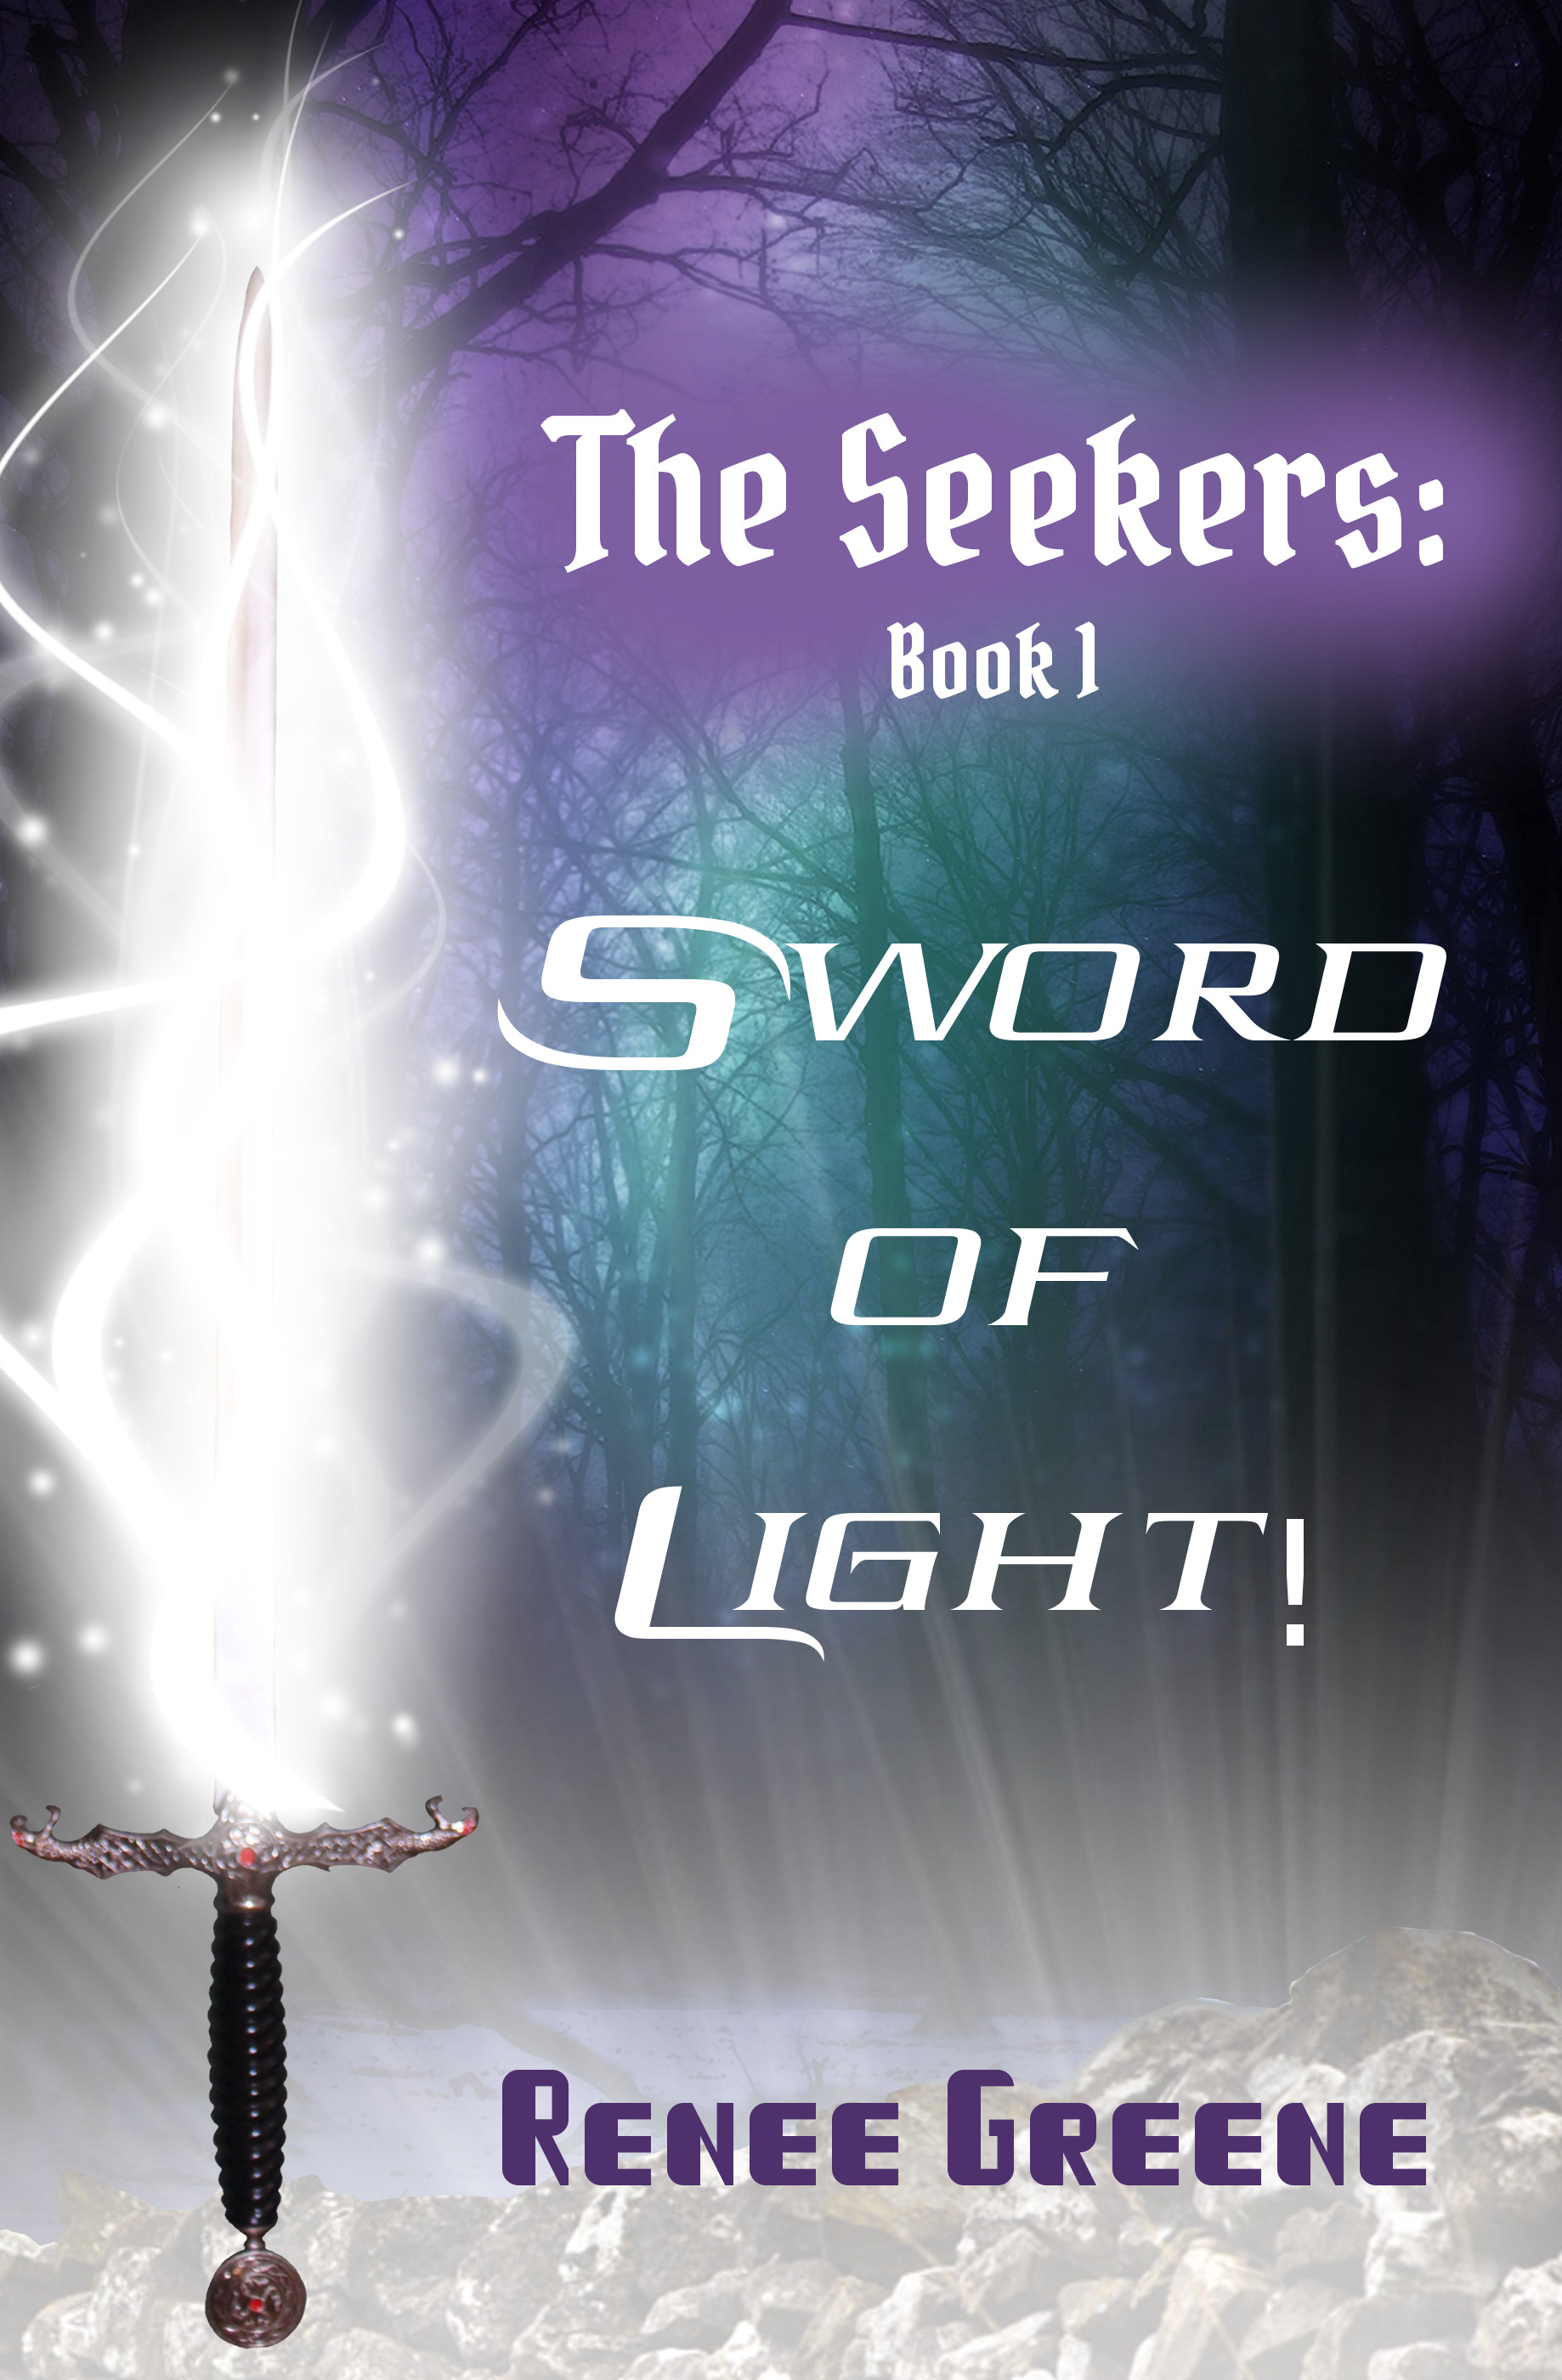 Sword of Light! The Seekers Book 1